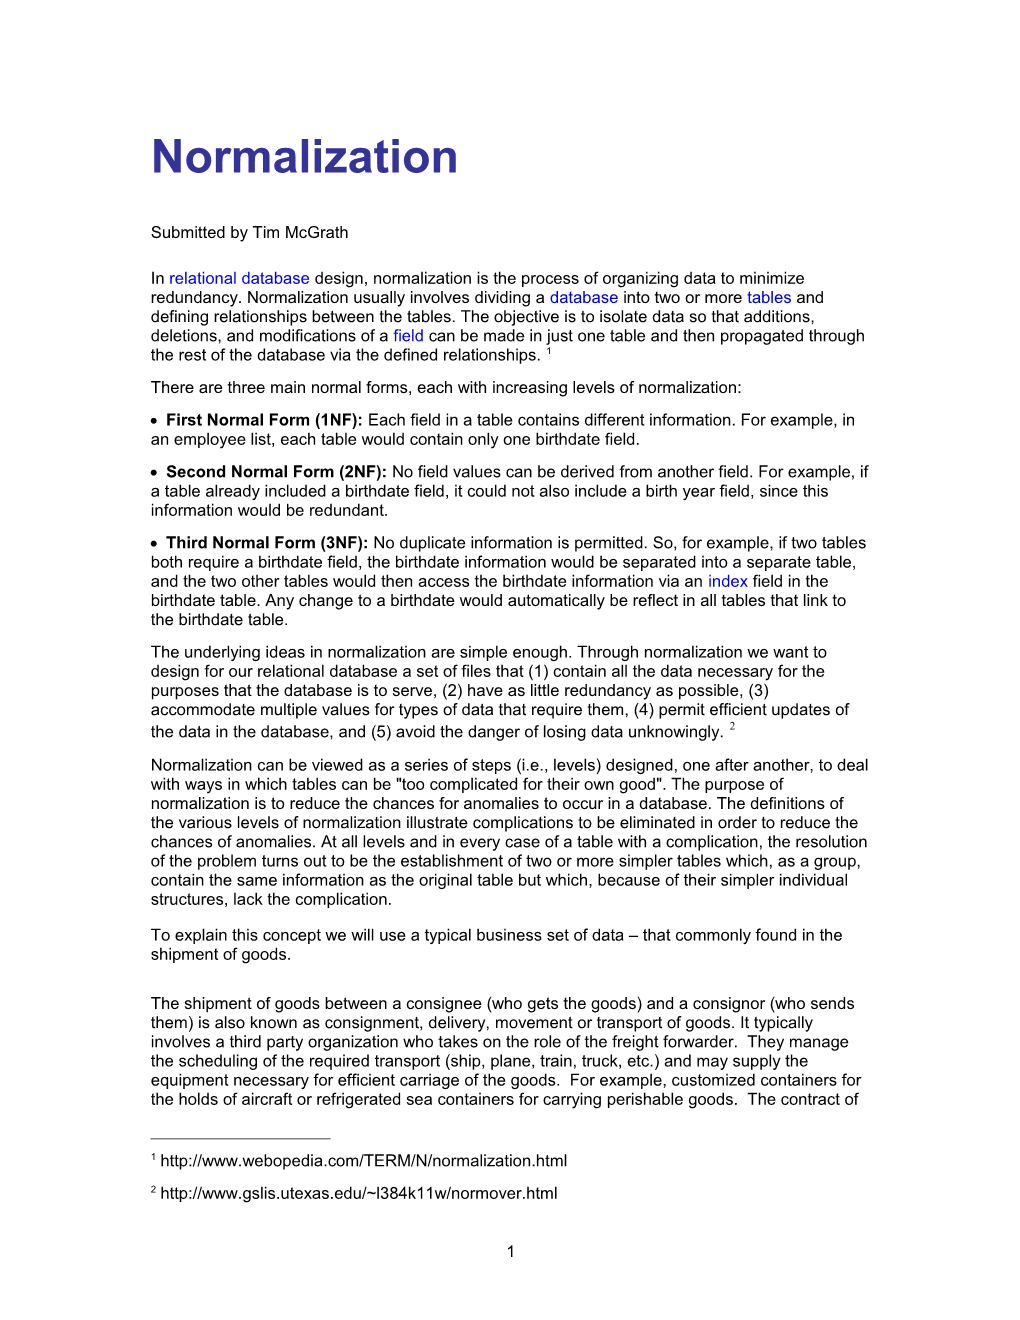 There Are Three Main Normal Forms, Each with Increasing Levels of Normalization